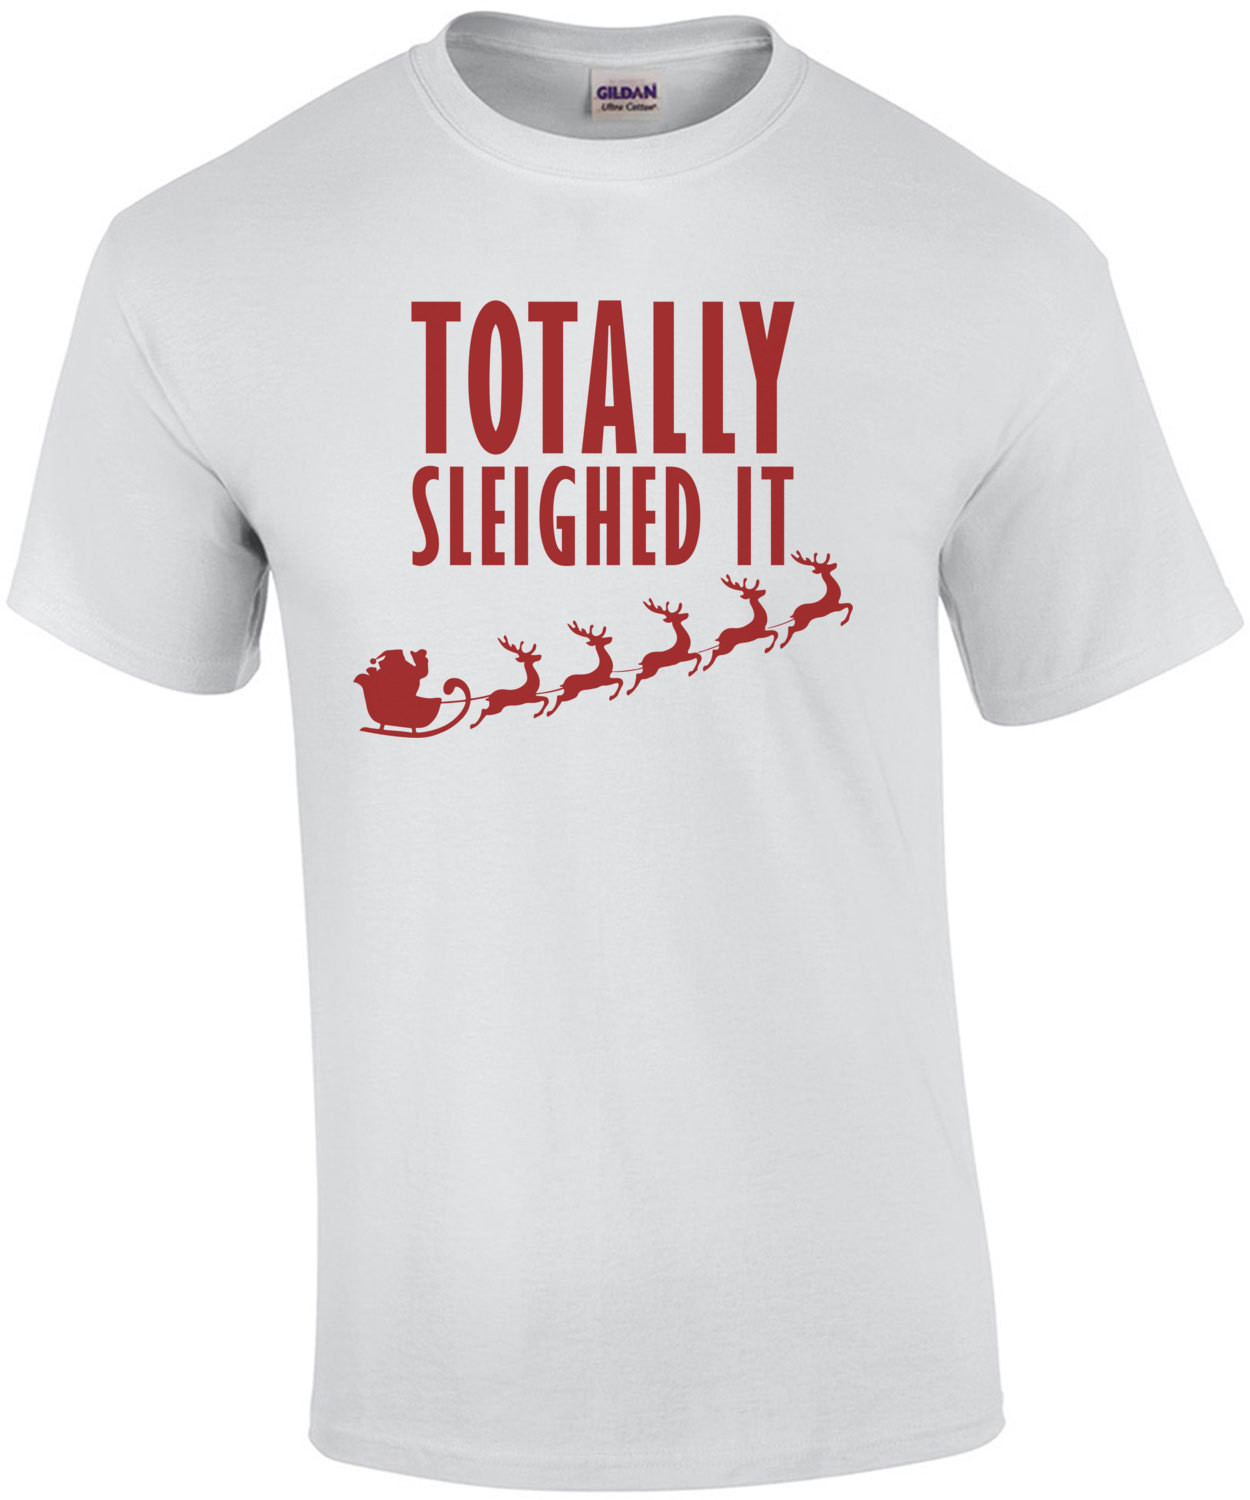 Totally sleighed it - christmas t-shirt